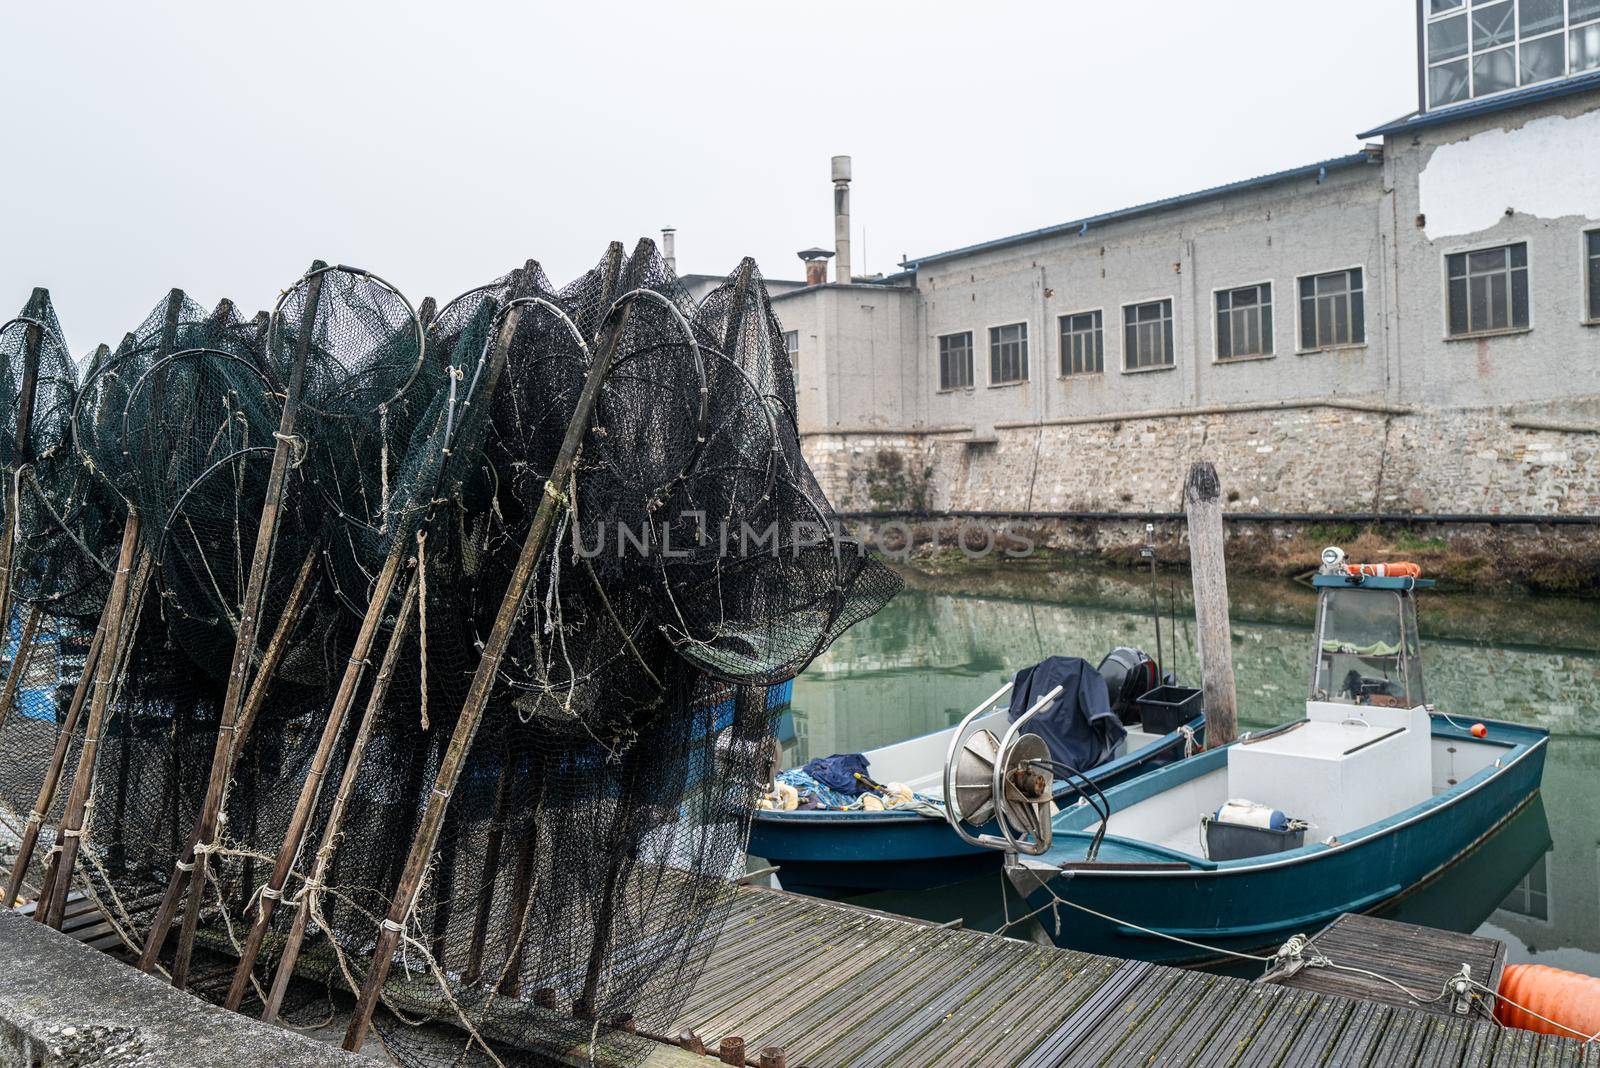 Two small fishing boats and prepared creels in an old fishing port.